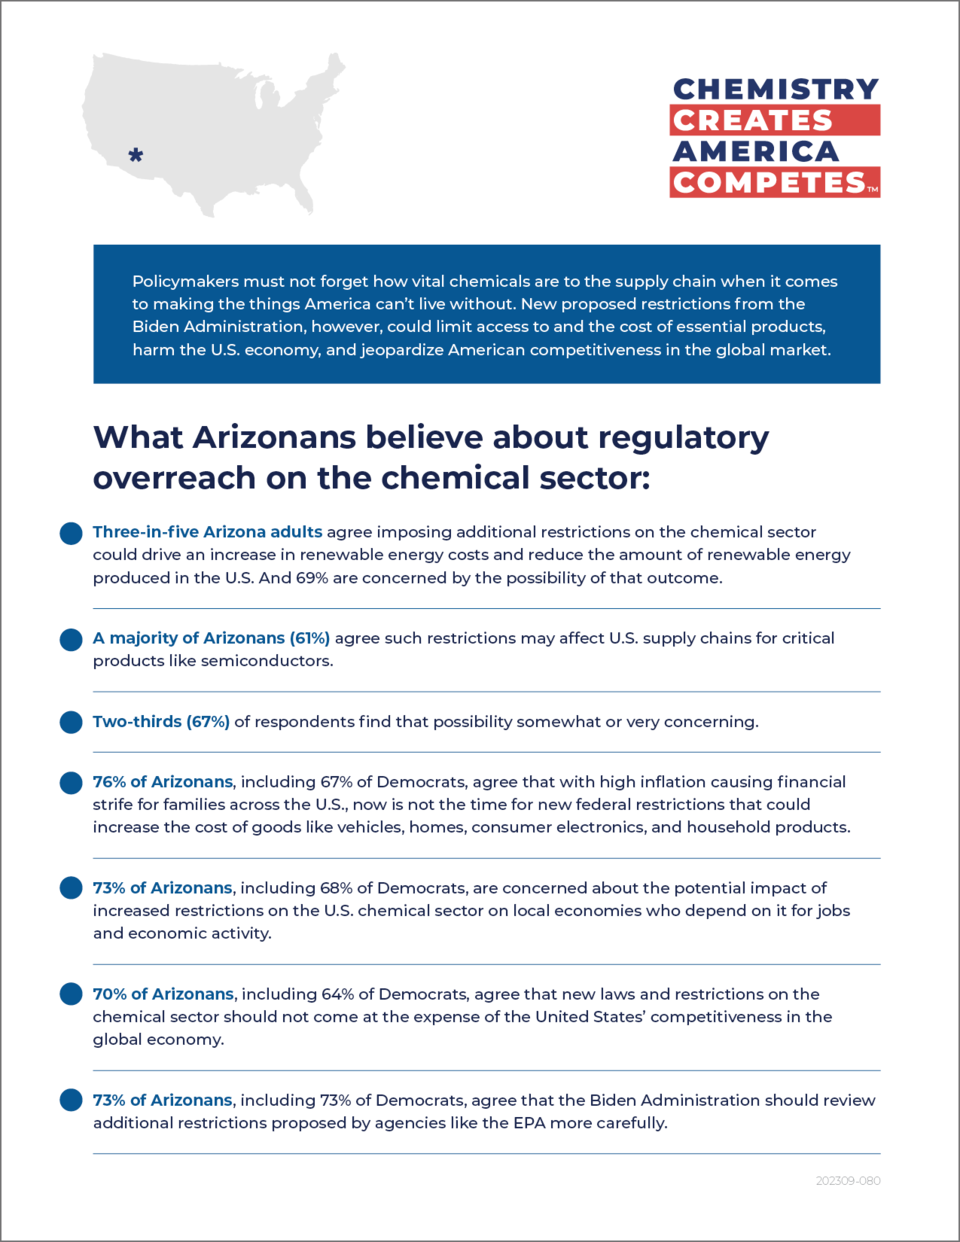 What Arizonans Believe About Regulatory Overreach on Chemical Sector - Fact Sheet